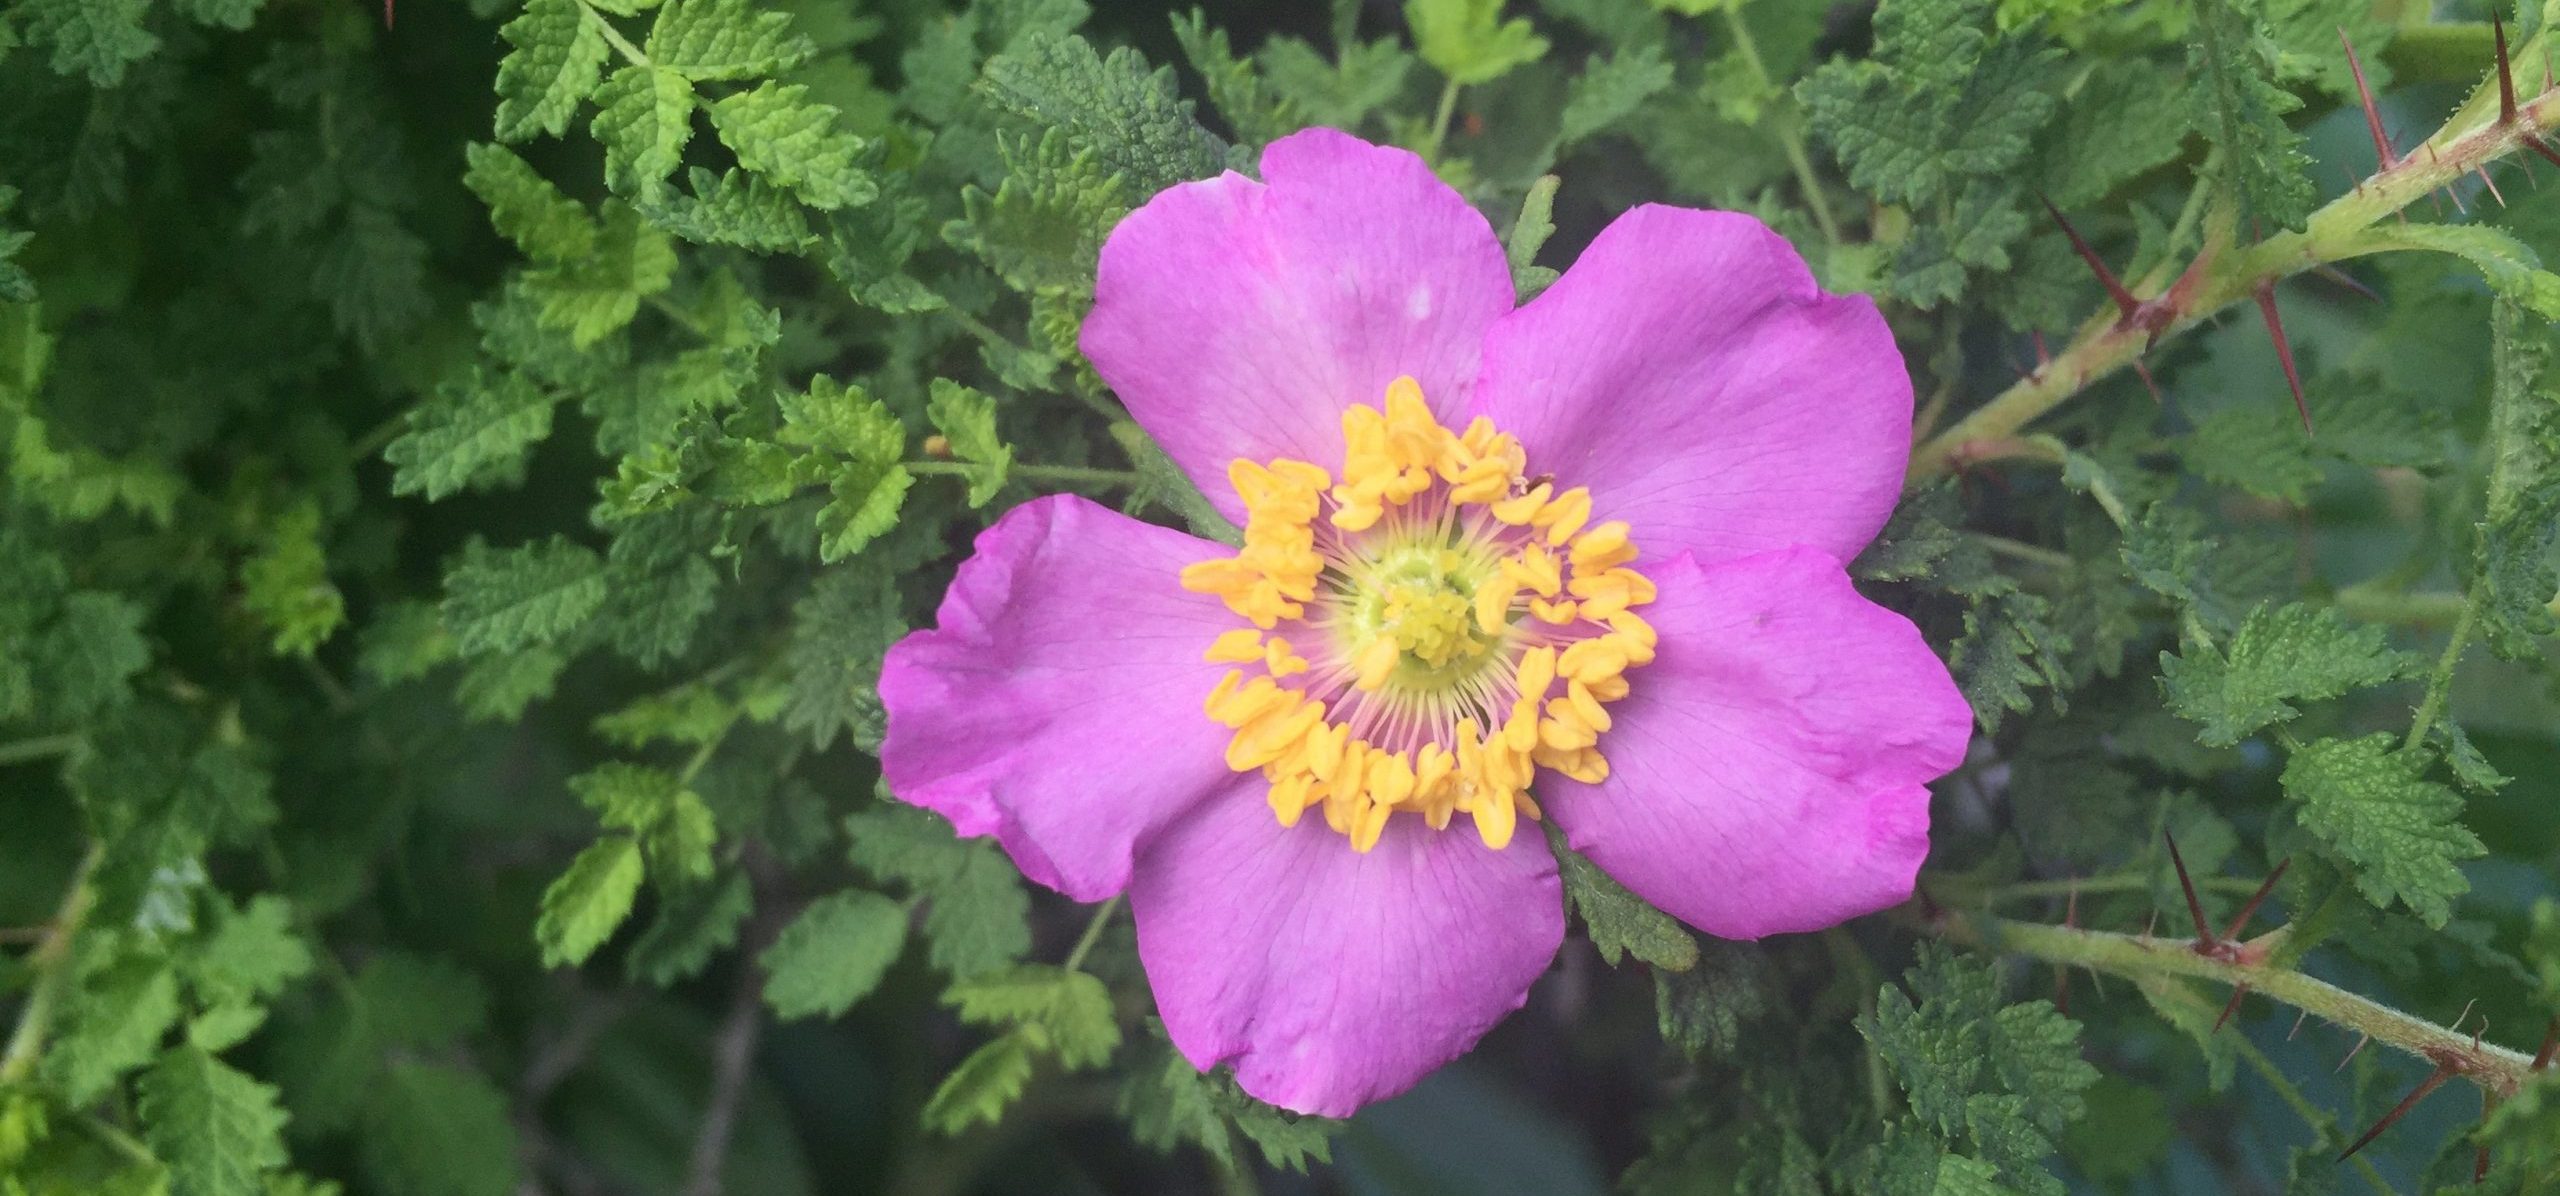 Small-leaved rose is officially recognized as Rosa minutifolia, and calling it otherwise in your database could lead to confusion when sharing the data, even if would smell the same.